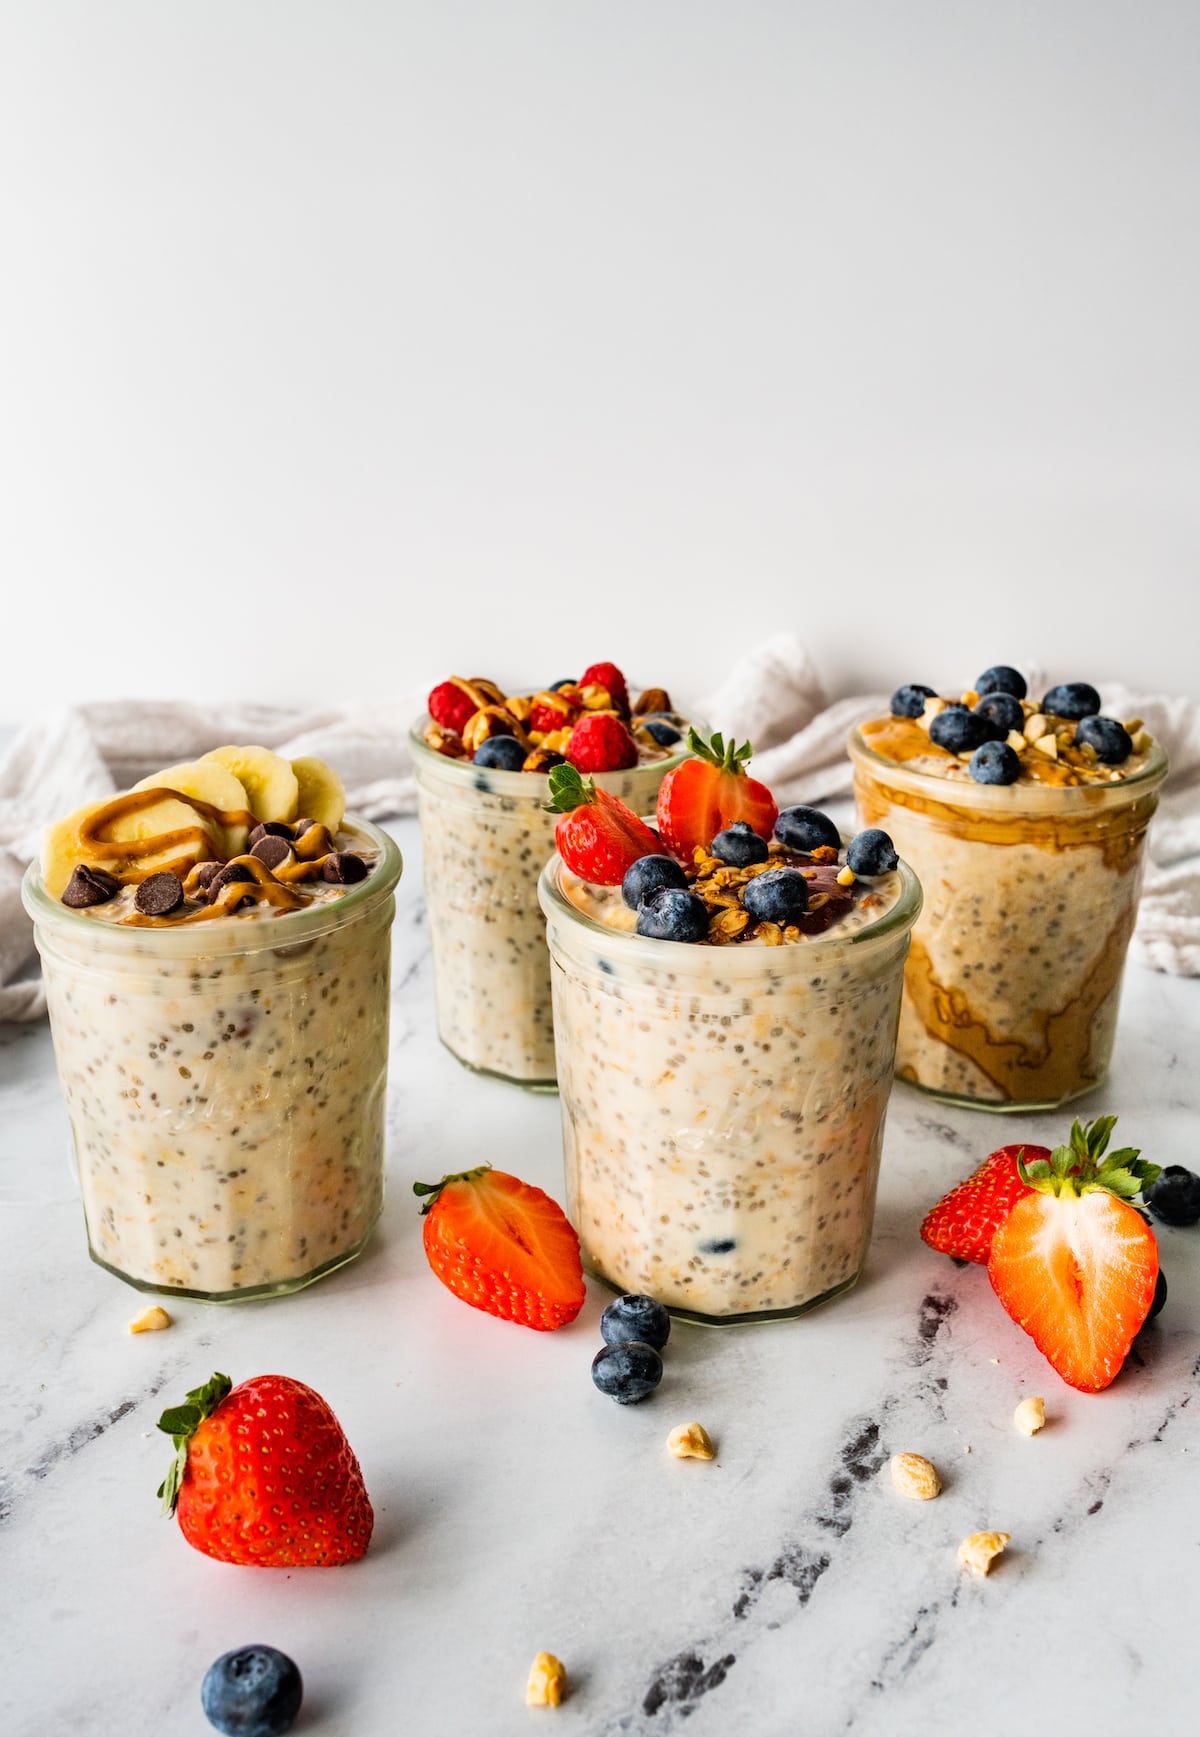 Four glass jars with overnight oats. The oats are topped with fresh berries and nut butter.